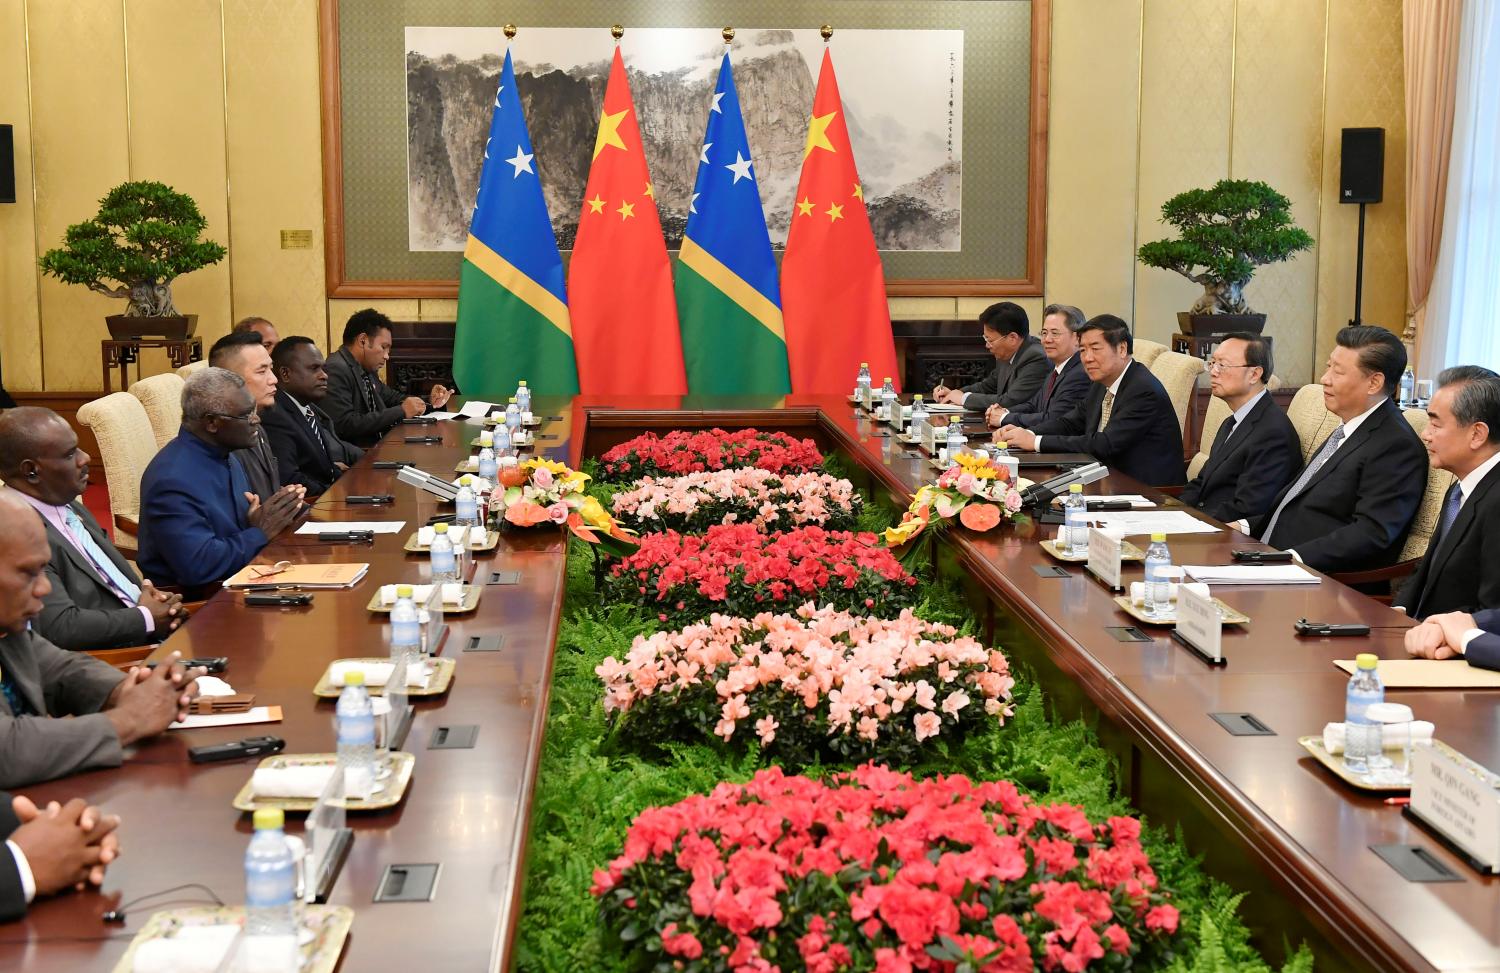 Solomon Islands Prime Minister Manasseh Sogavare speaks with Chinese President Xi Jinping during their meeting at the Diaoyutai State Guesthouse in Beijing, China, October 9, 2019. Parker Song/Pool via REUTERS